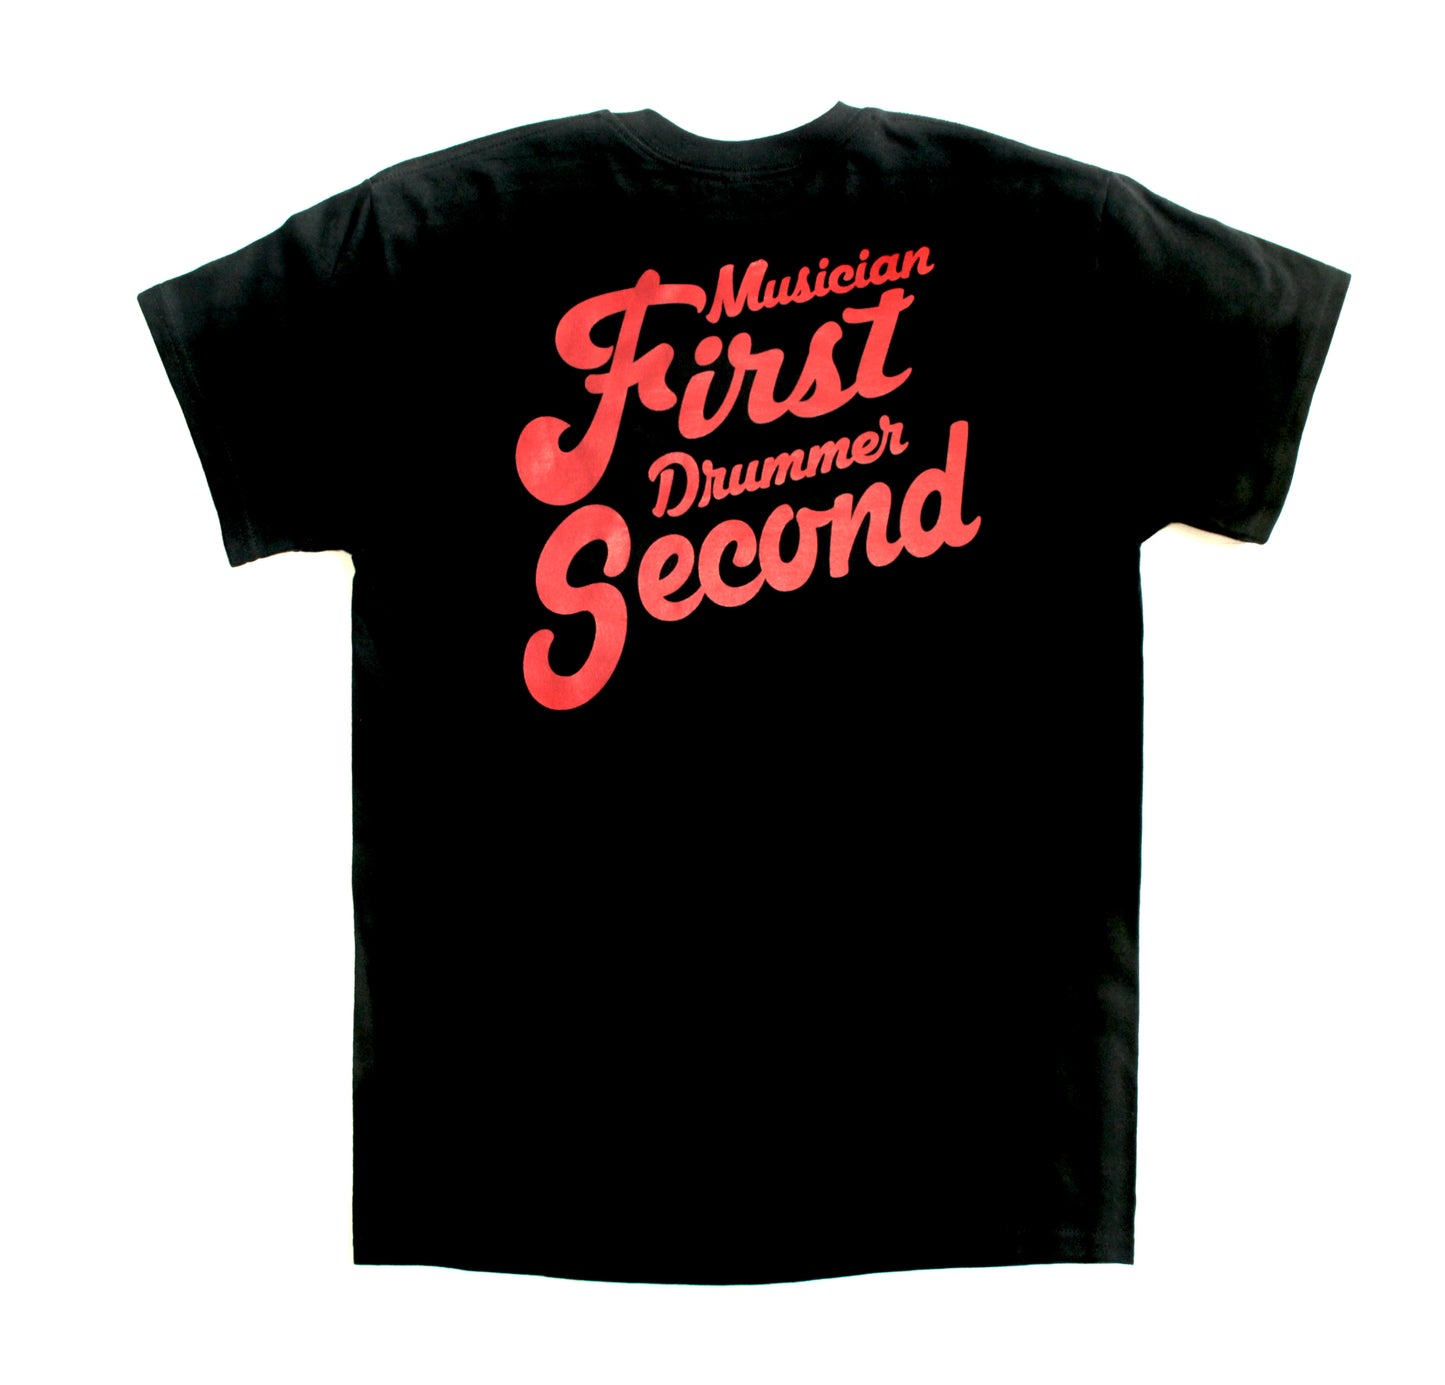 MUSICIAN FIRST DRUMMER SECOND TEE (black/red)